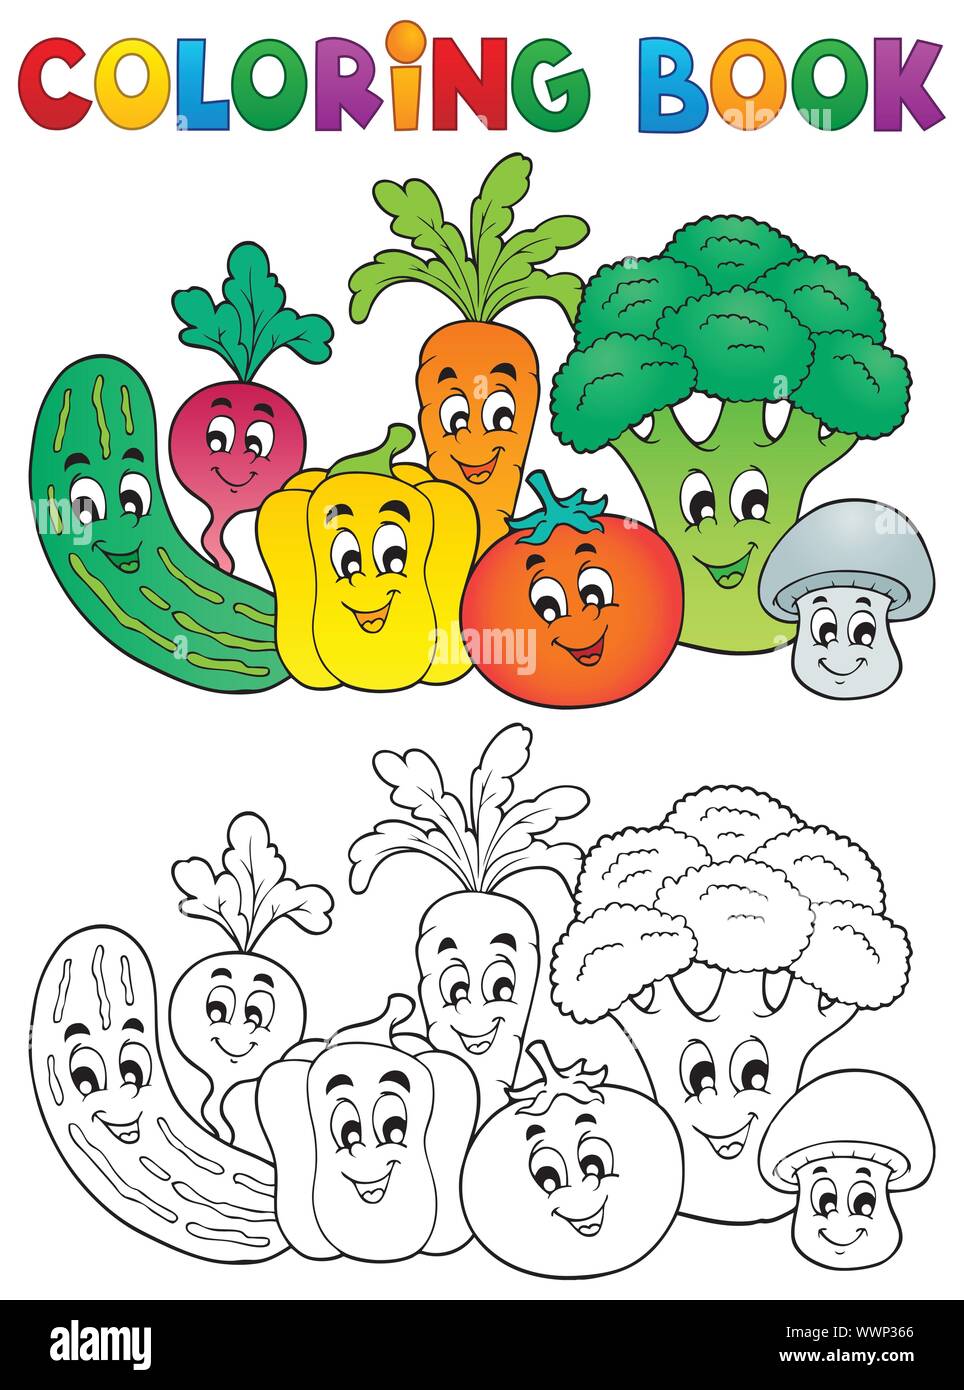 Coloring book vegetable theme 2 Stock Vector